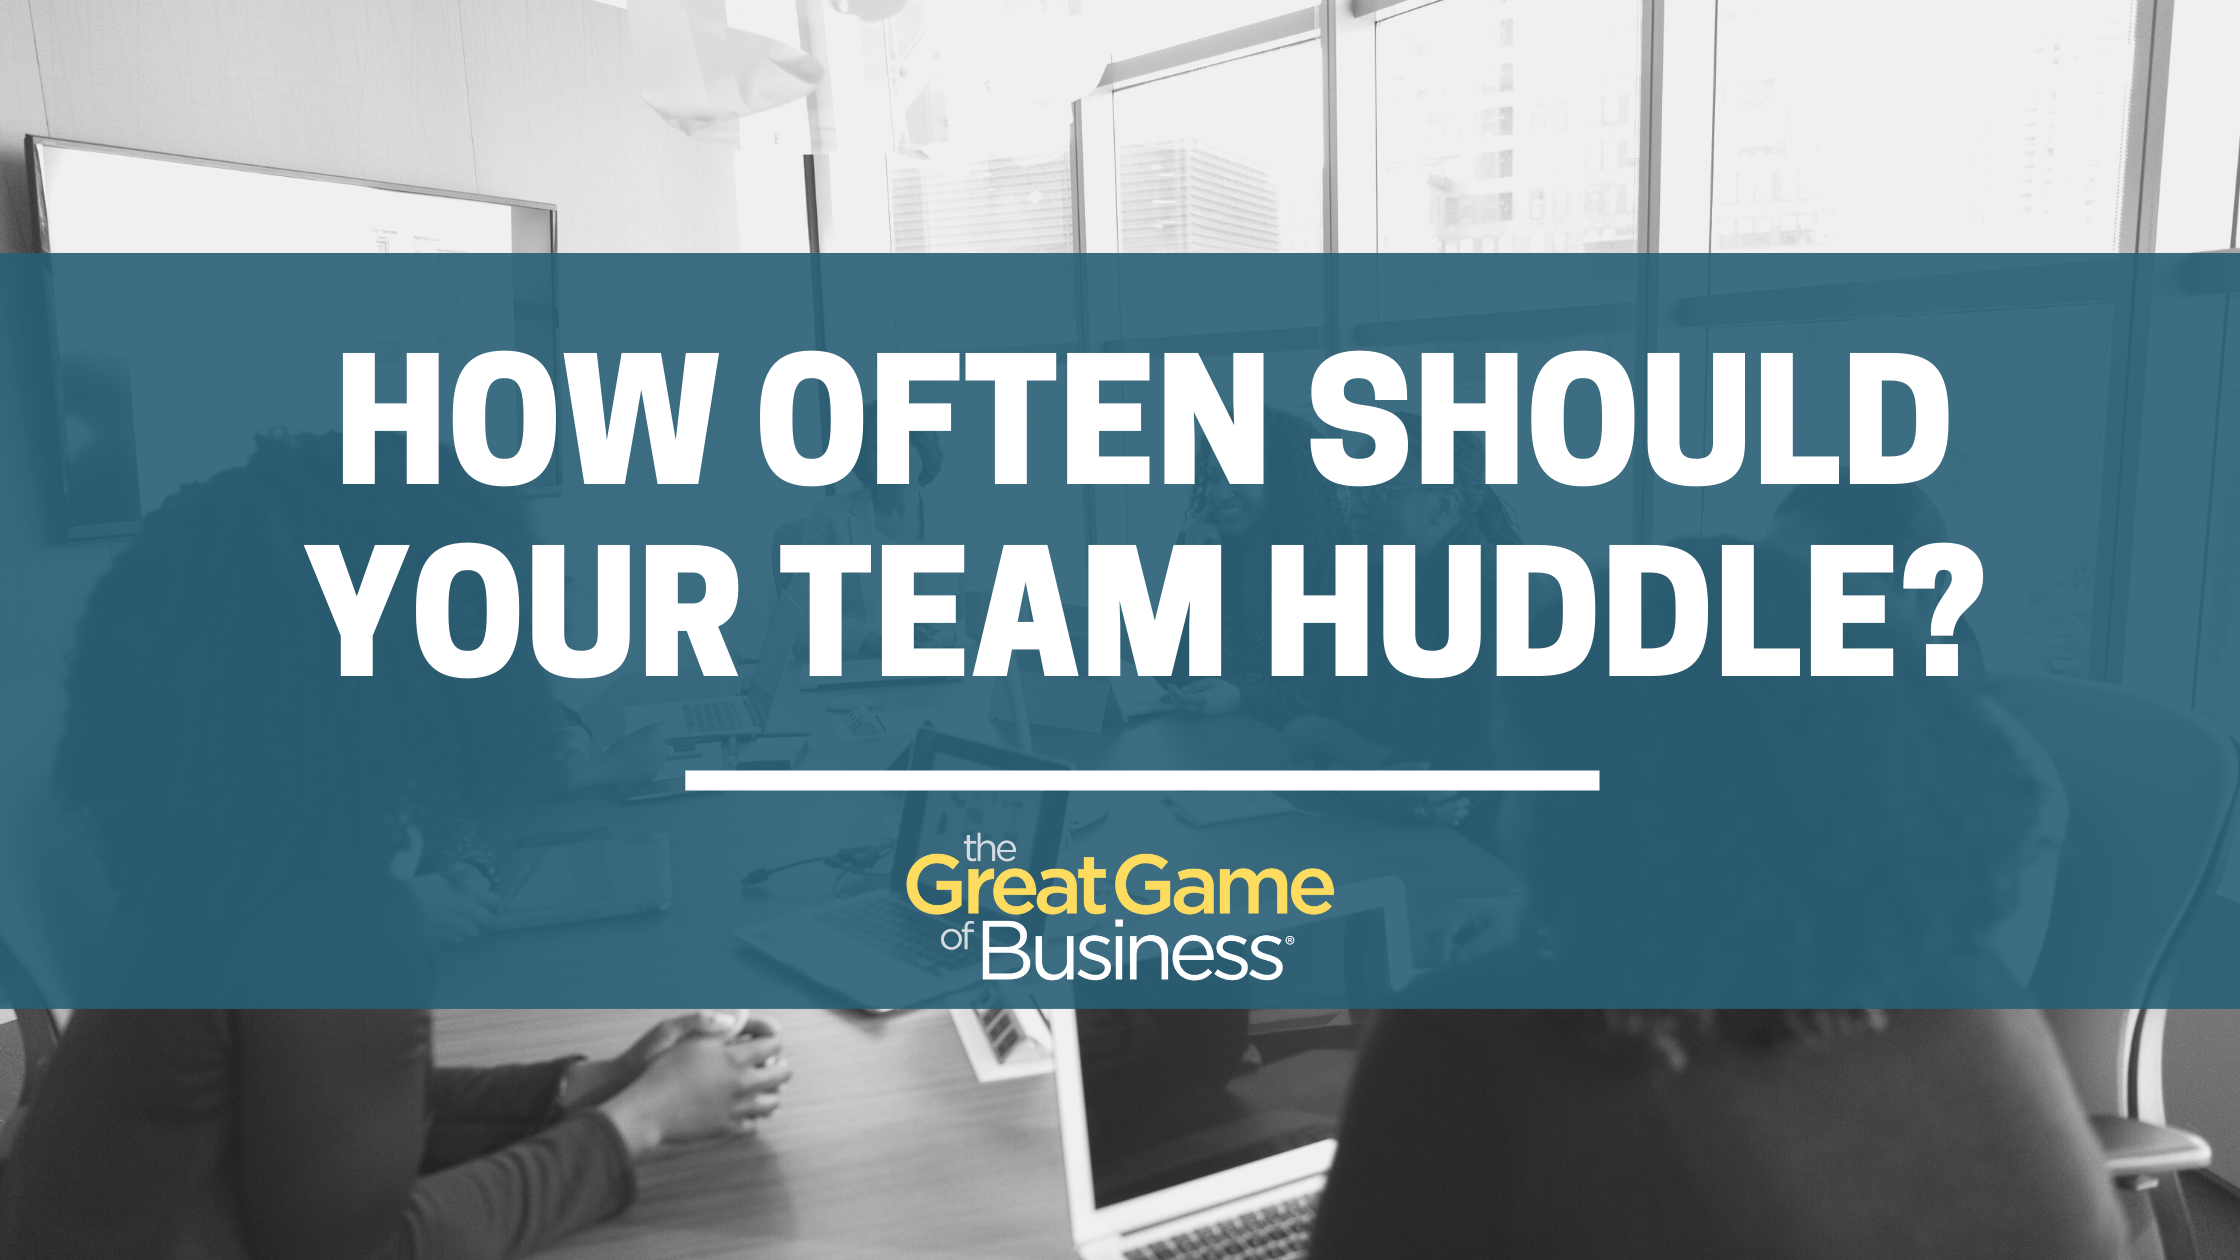 How often should your team huddle